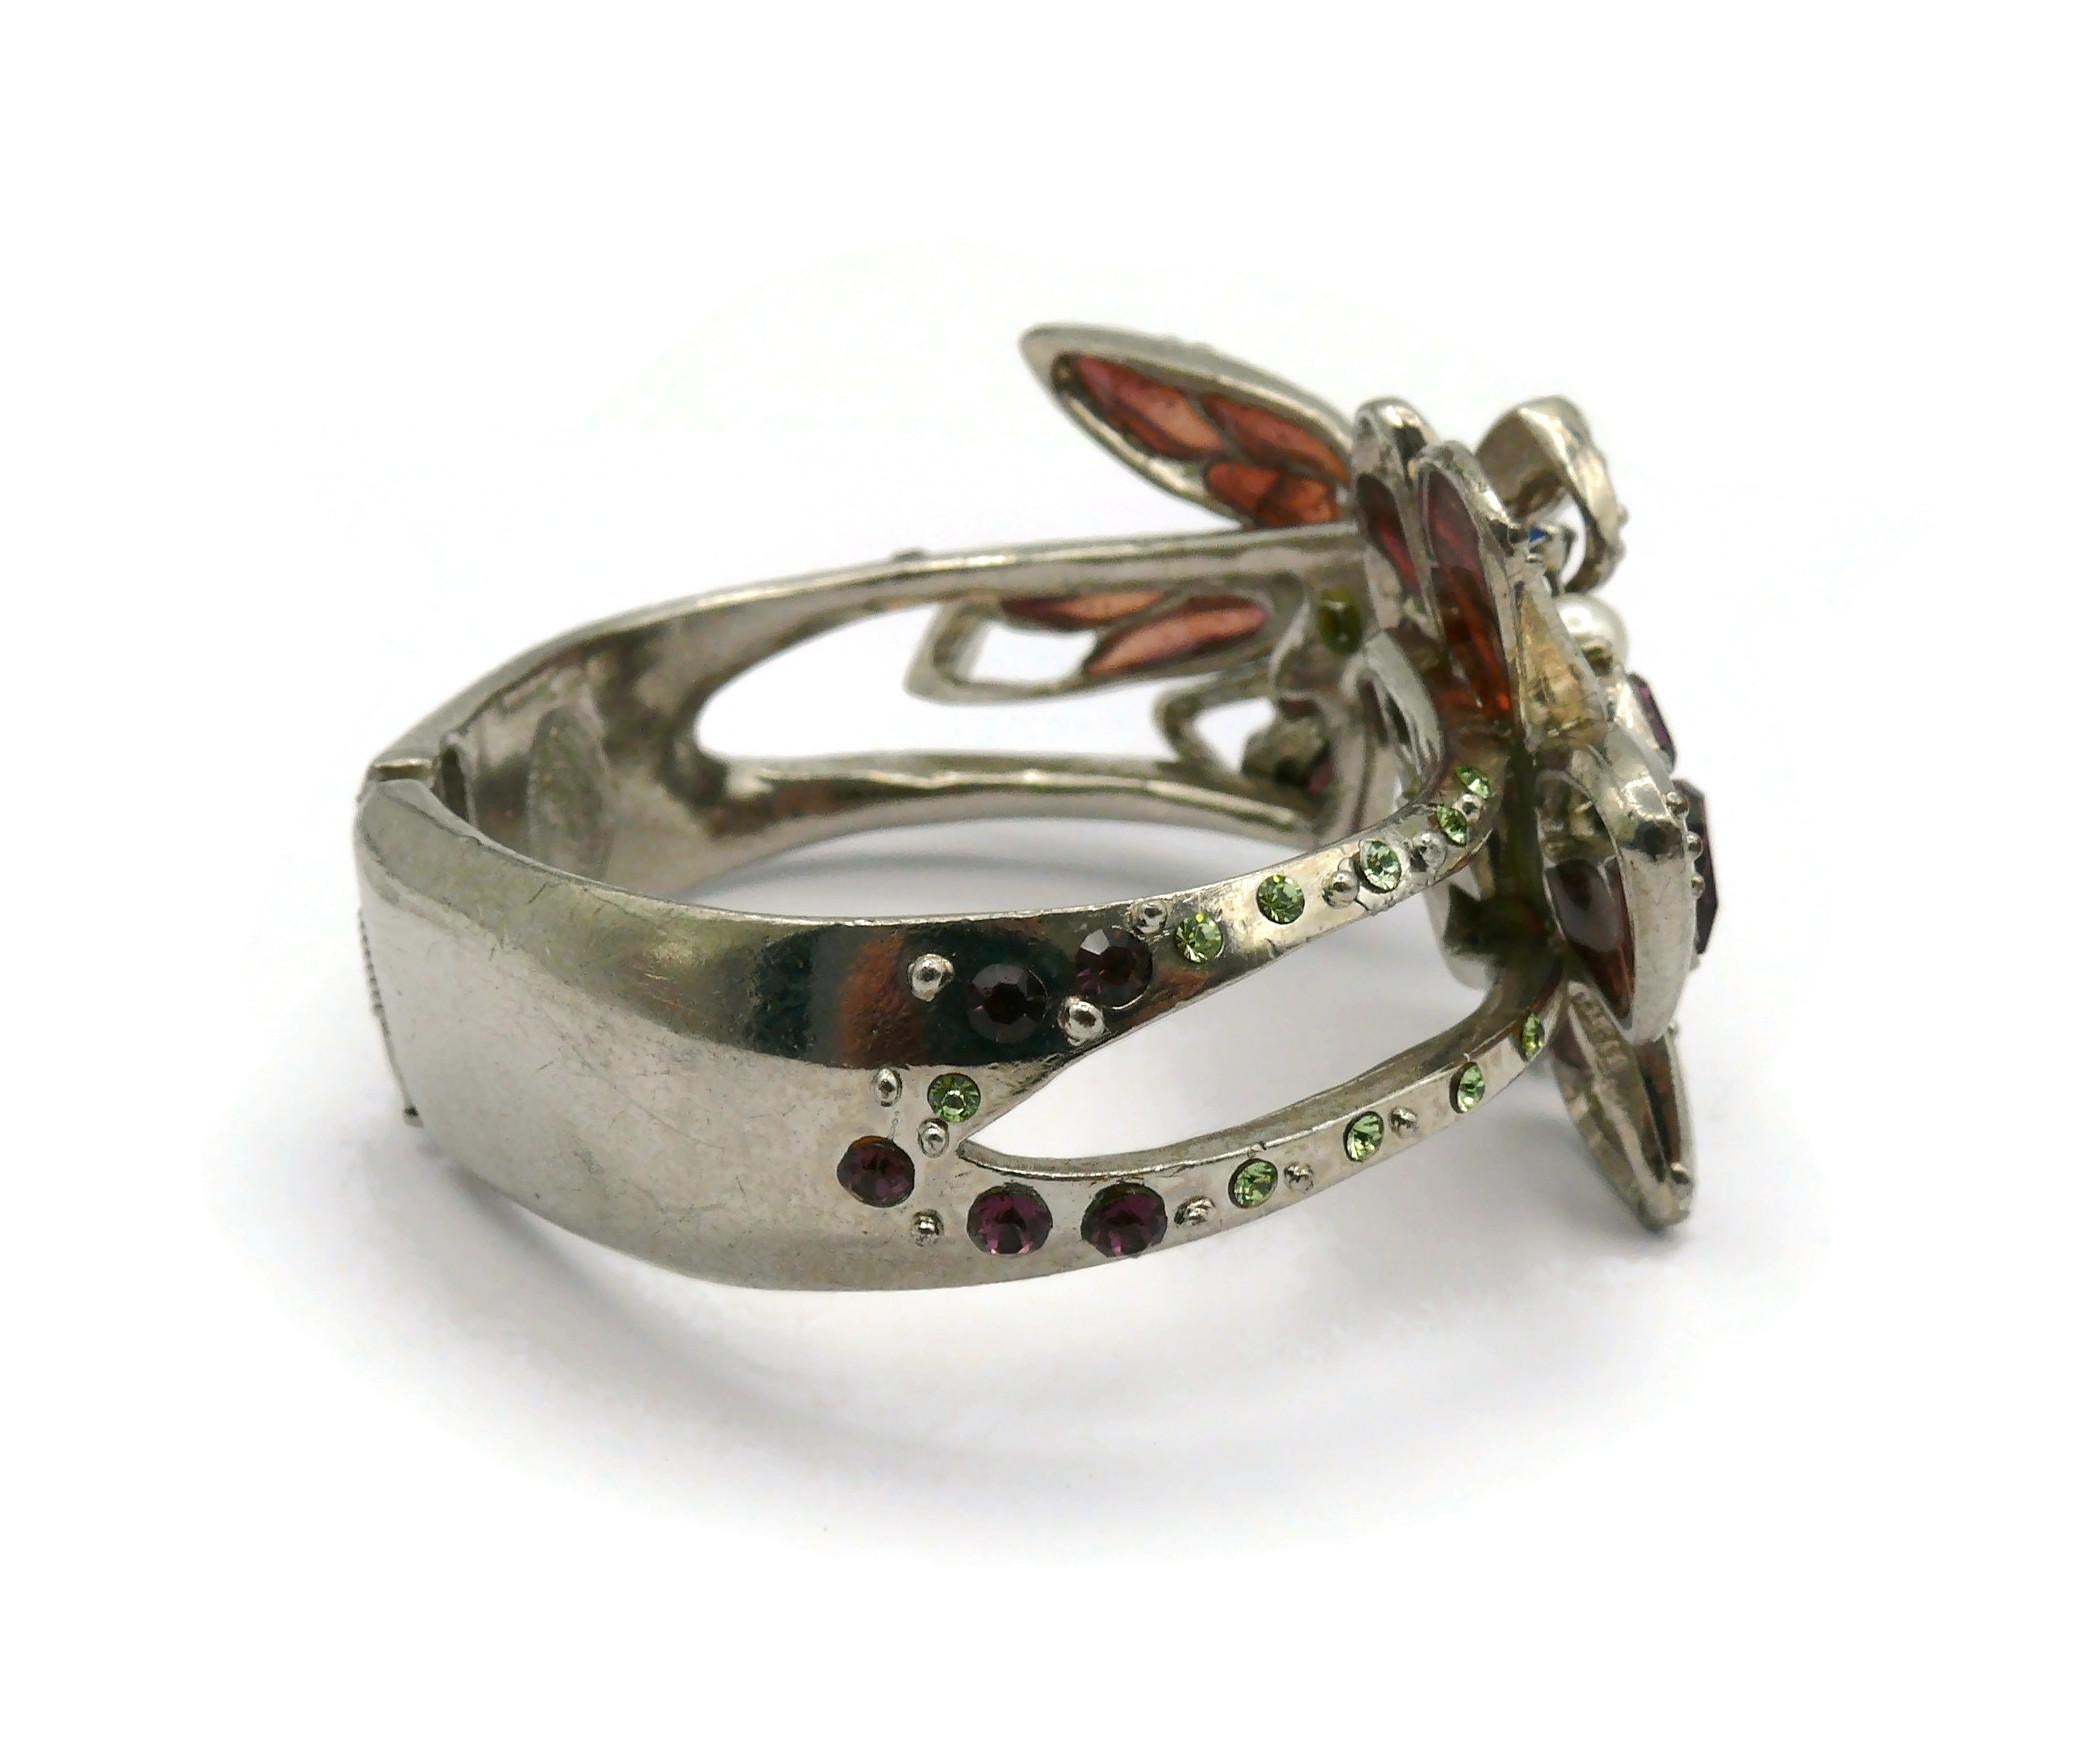 CHRISTIAN LACROIX Vintage Jewelled Butterfly Clamper Bracelet For Sale 4